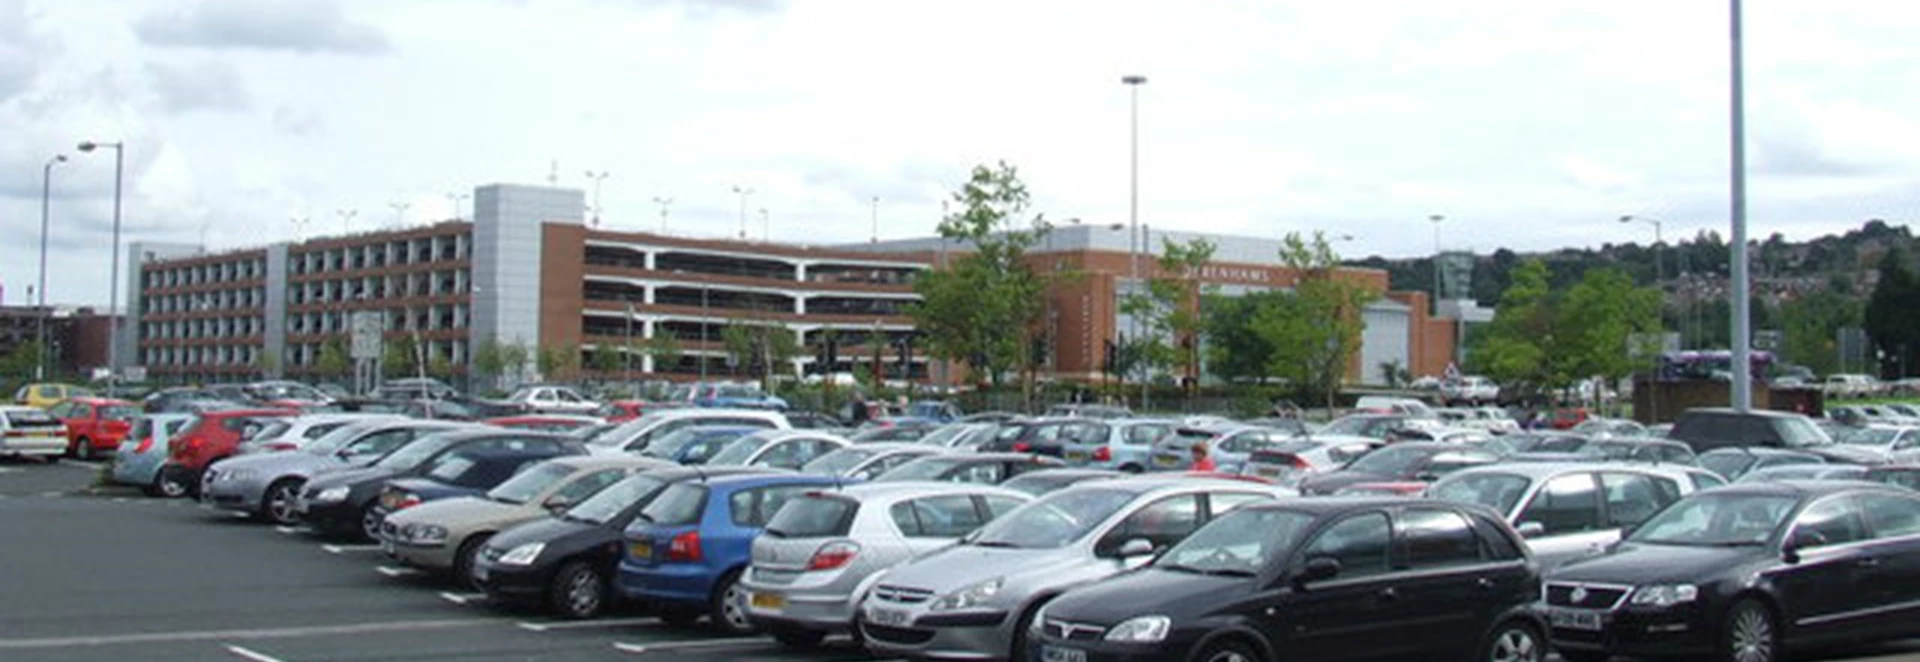 Five things NOT TO DO when parking in a car park 